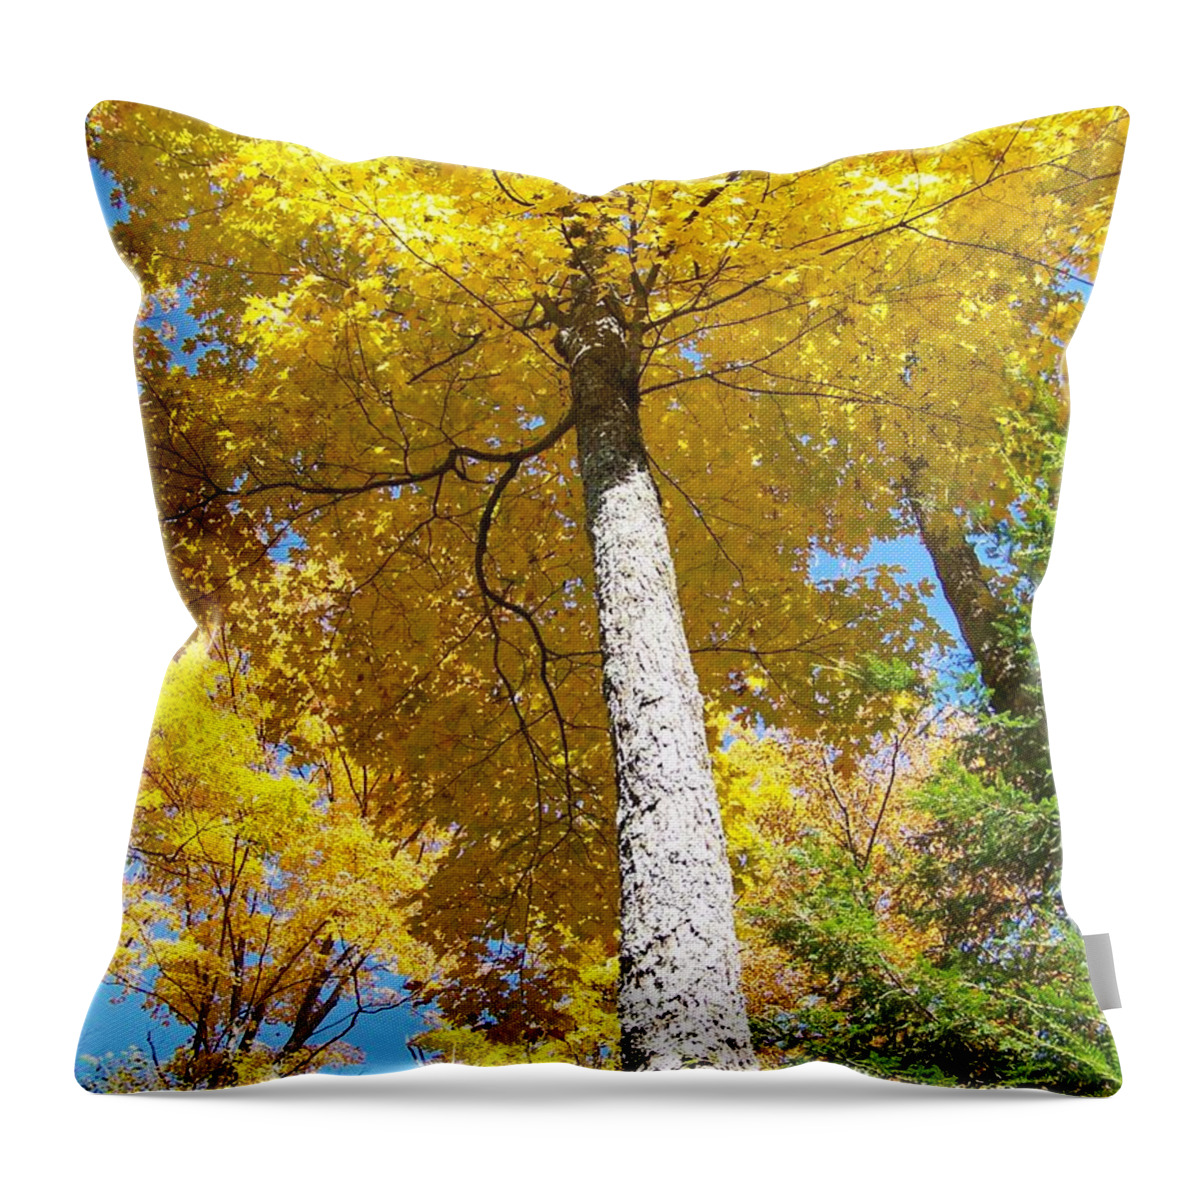 Autumn Throw Pillow featuring the photograph The Yellow Umbrella - Photograph by Jackie Mueller-Jones